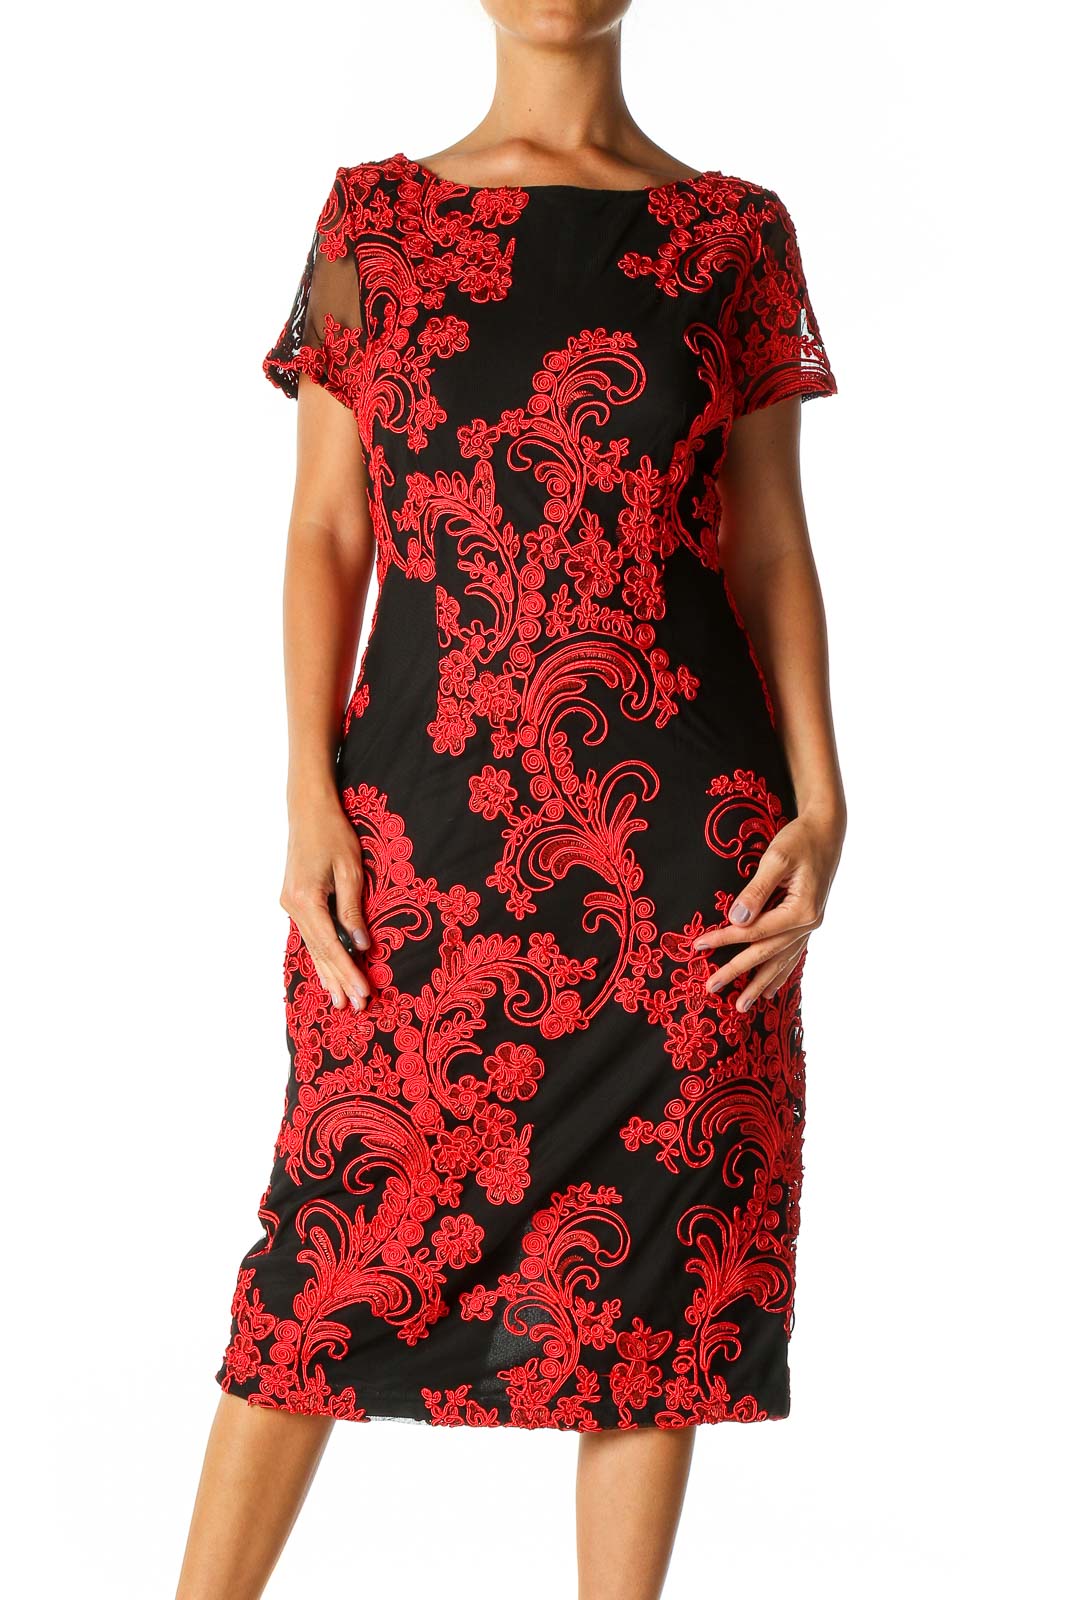 Red Textured Holiday A-Line Dress Front